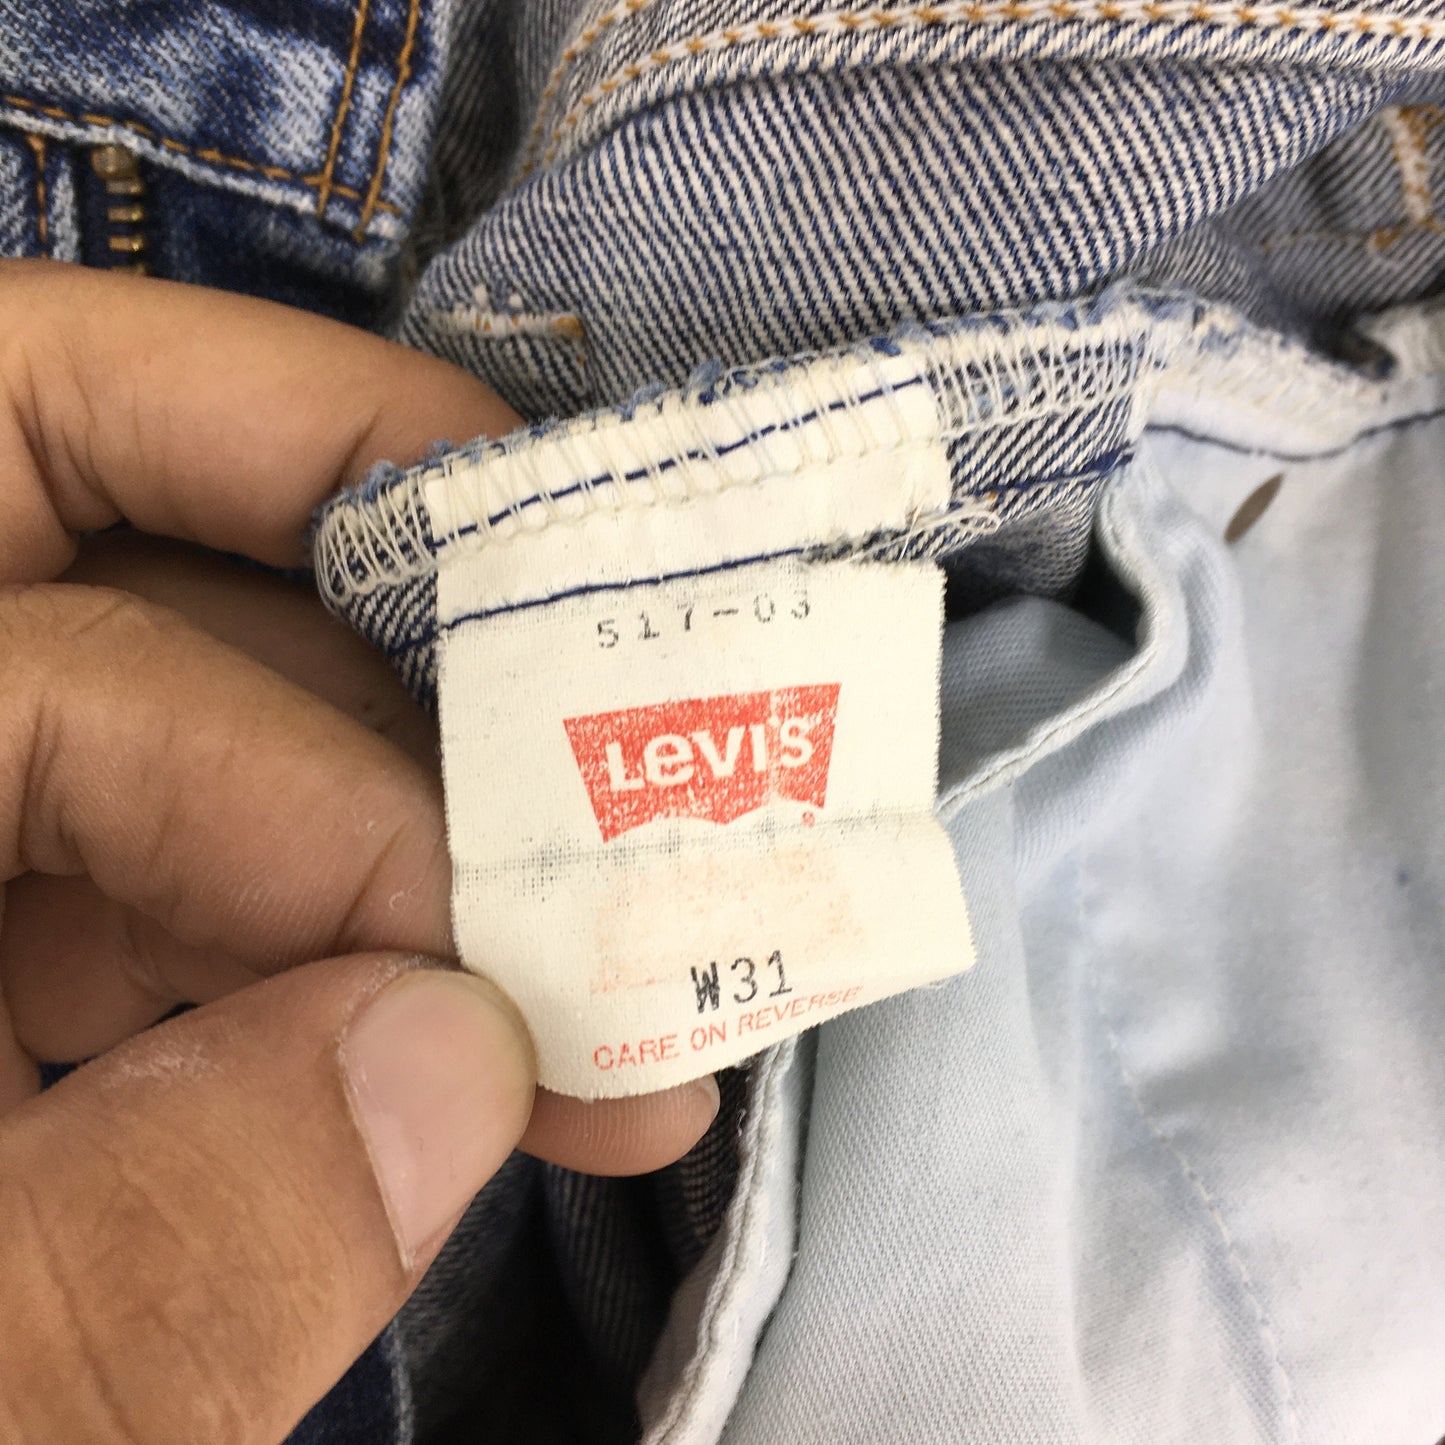 Levi's 517 Faded High Flare Bootcut Jeans Size 30x35